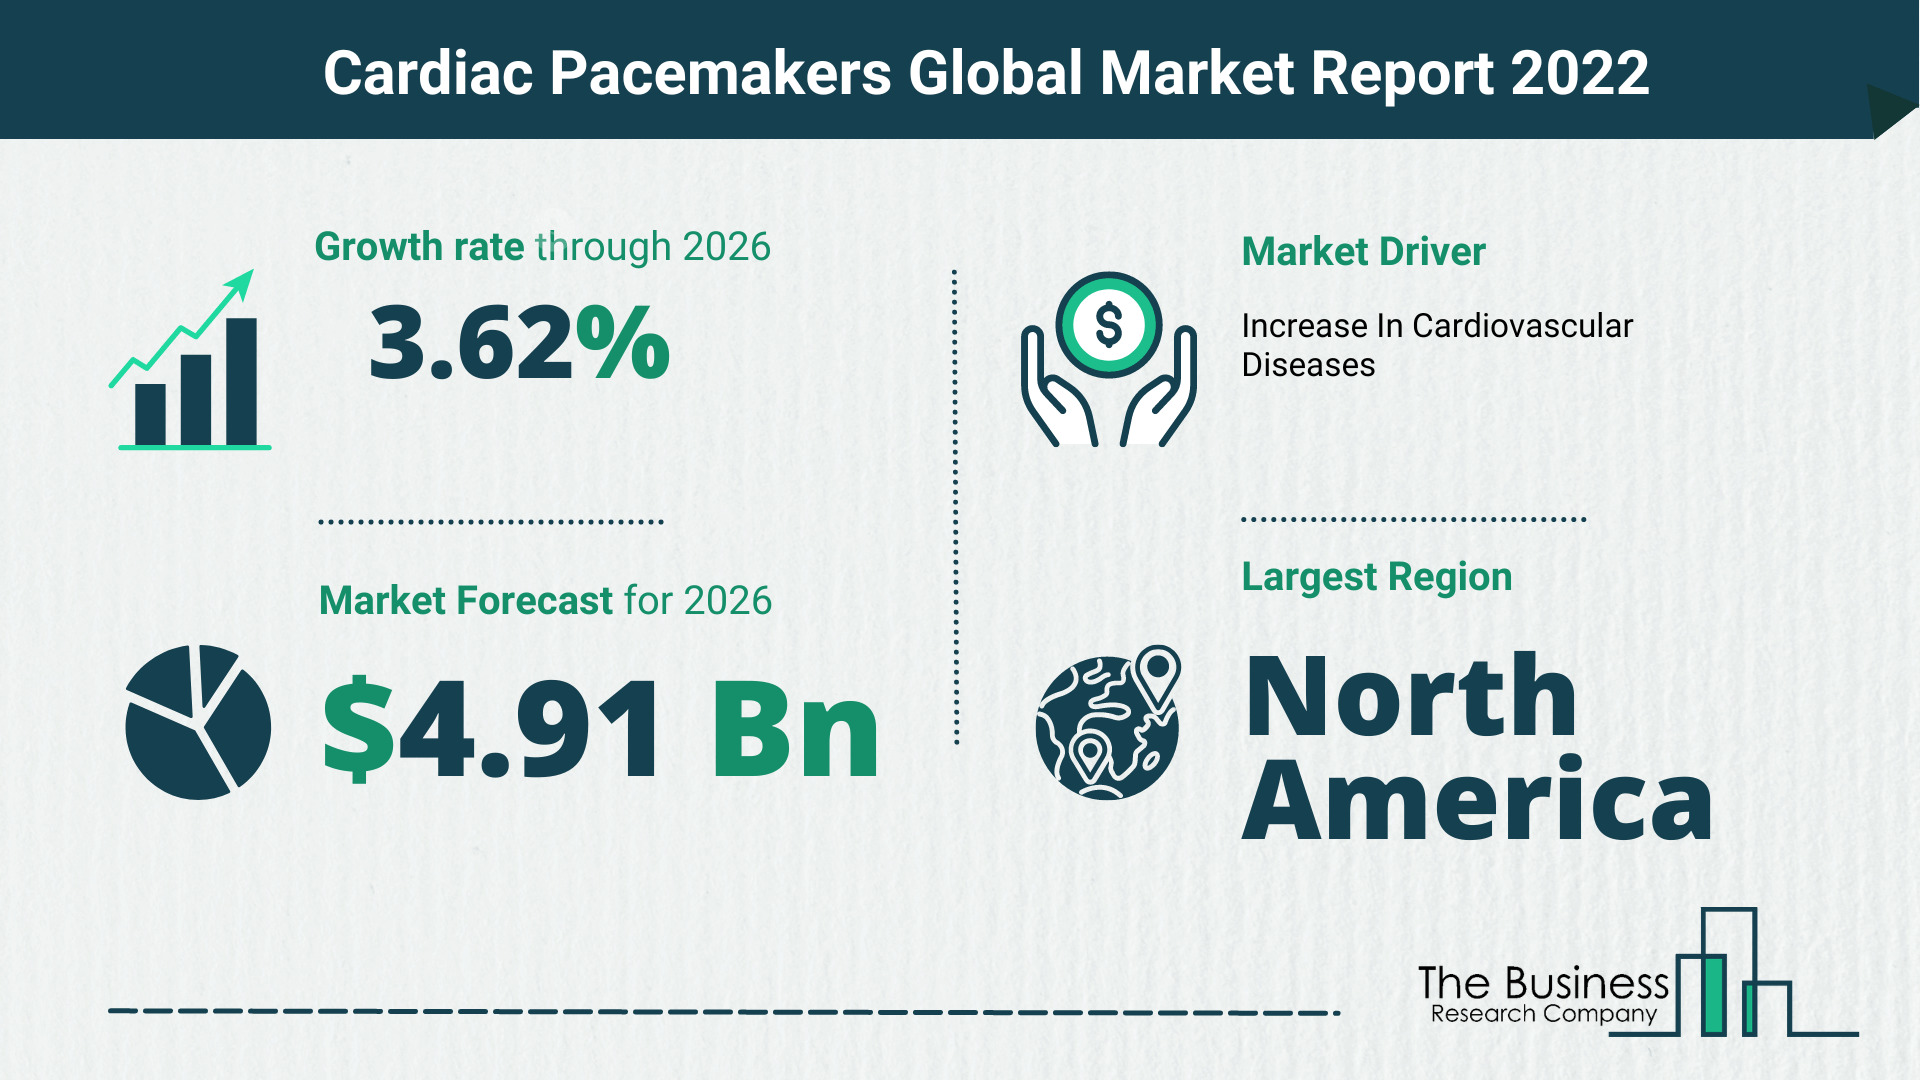 Global Cardiac Pacemakers Market